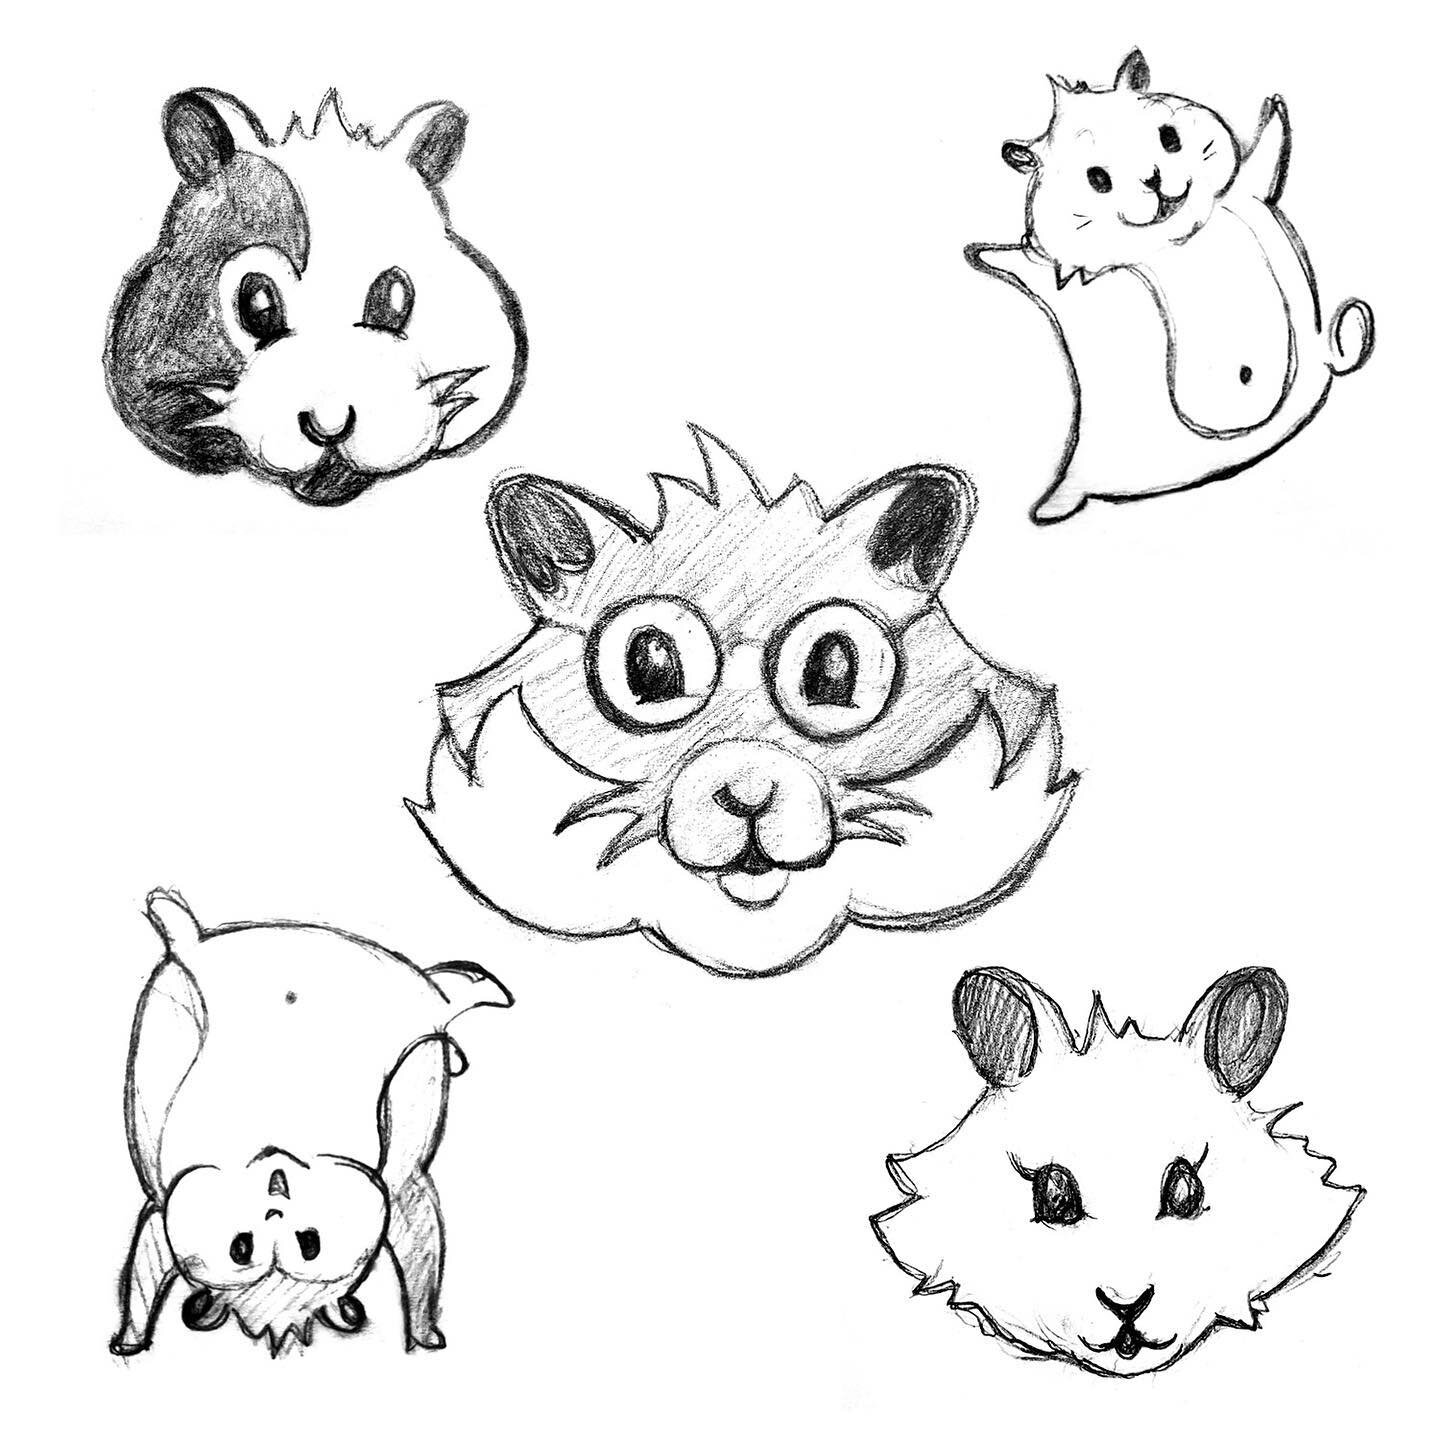 Initial sketches are always my favorite part of the design process, (and the most important!)
I was asked to design hamster icons for a font created by @stitzstudio based on their iconic hamster trails. Stay tuned for the final designs of this super 